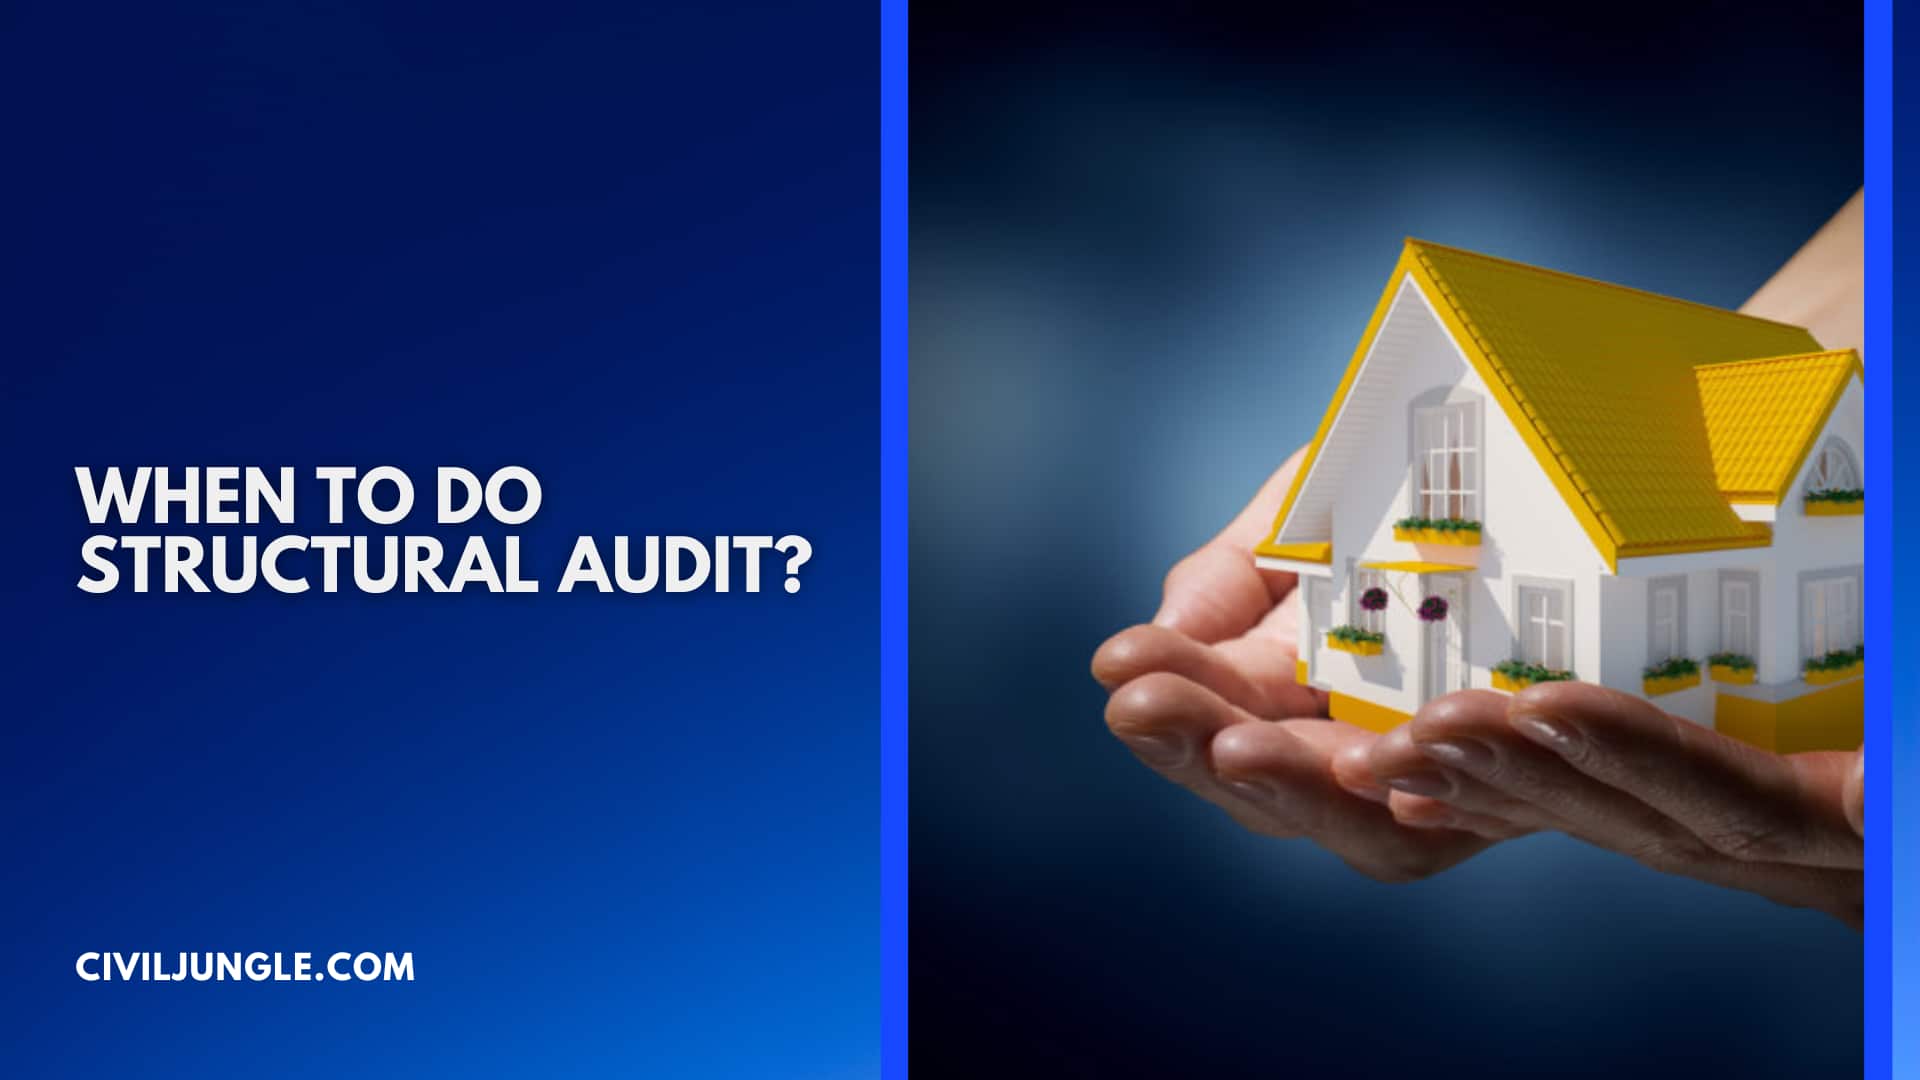 When to do Structural Audit?